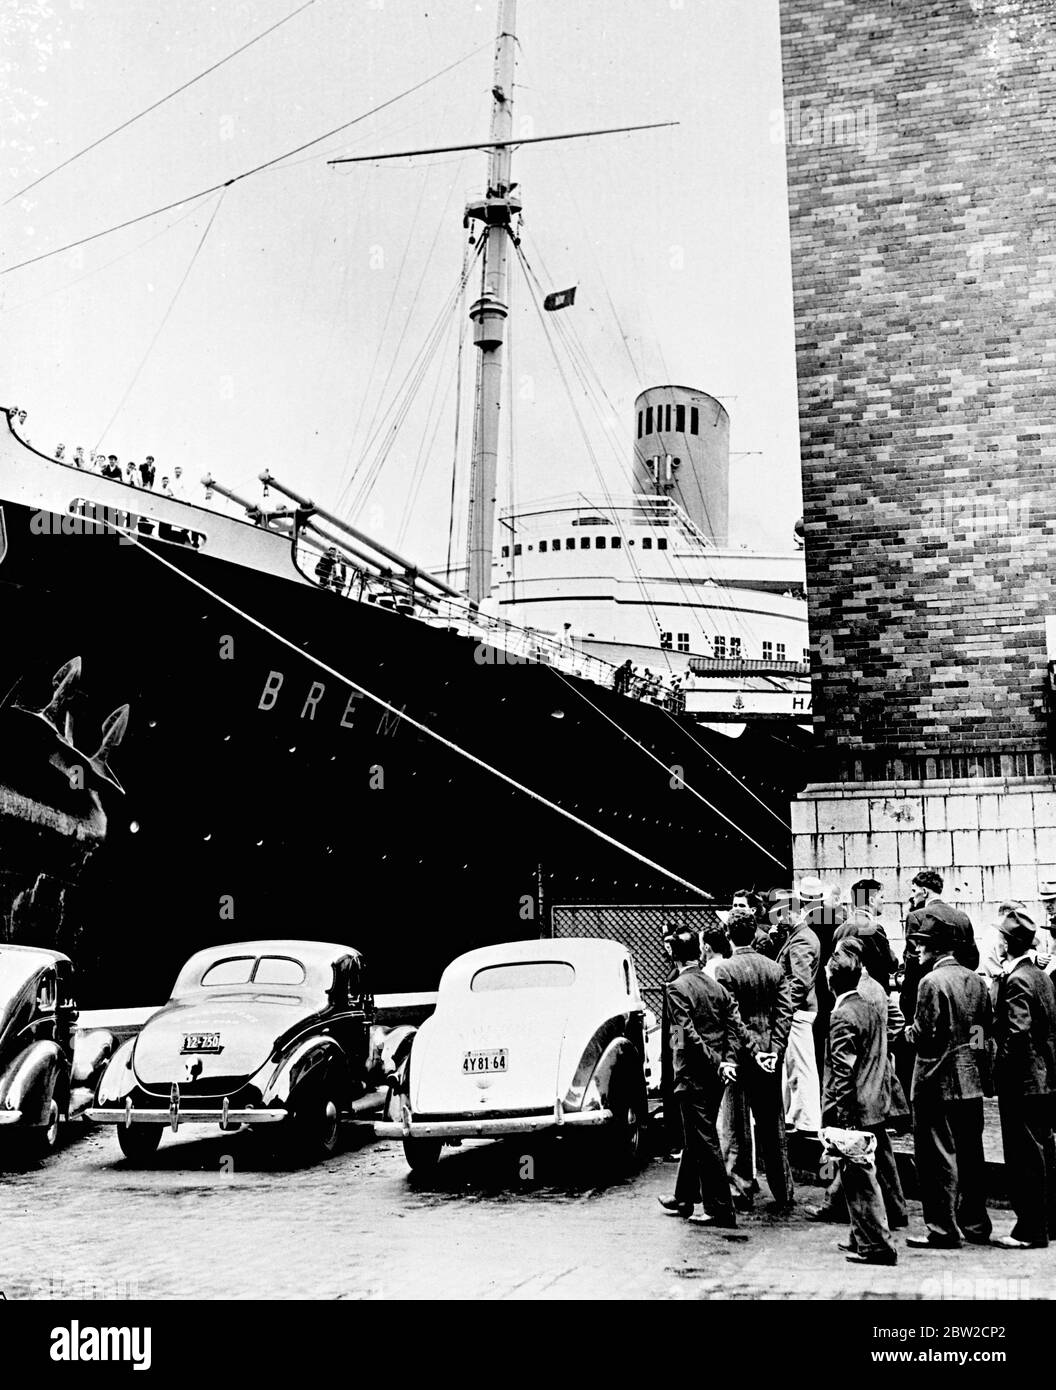 The North German Lloyd line Bremen was boarded today by customs officials,  and 17 passengers who had spend the night before the vessel at it's pier  were hastened off to Ellis Island